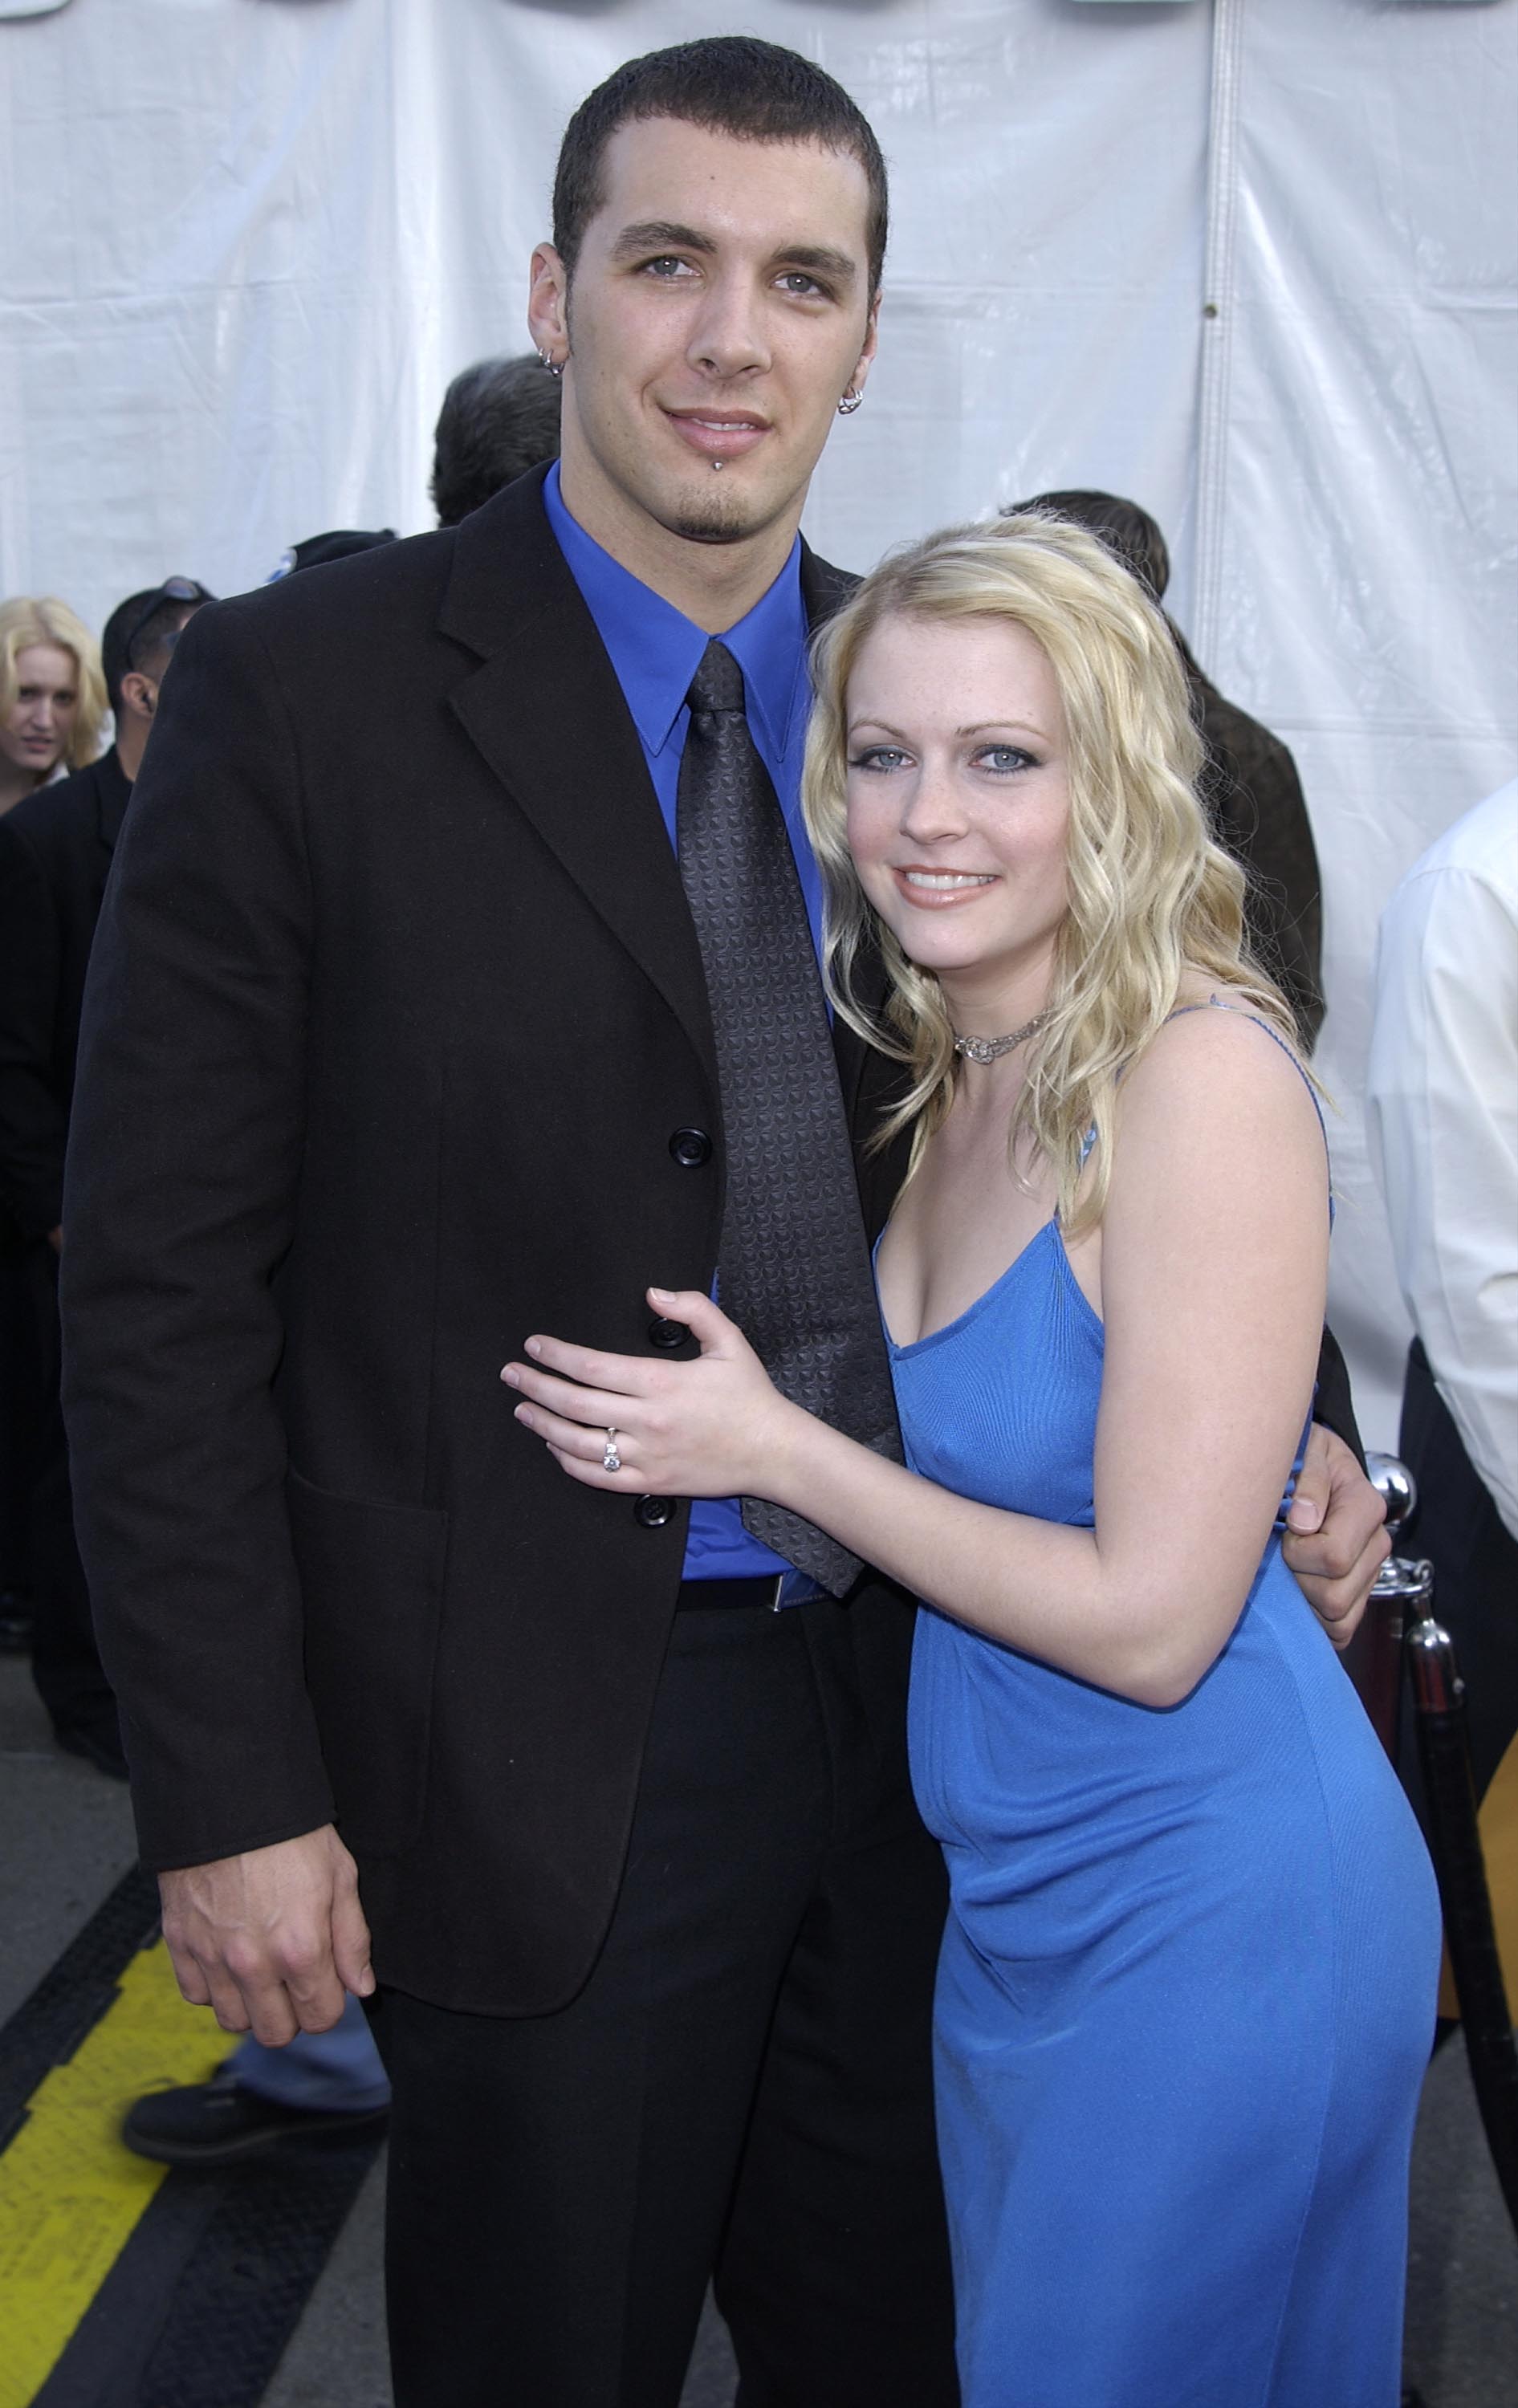 Mark Wilkerson and Melissa Joan Hart at the 30th Annual American Music Awards (AMA) in Los Angeles, on January 13, 2003. | Source: Getty Images